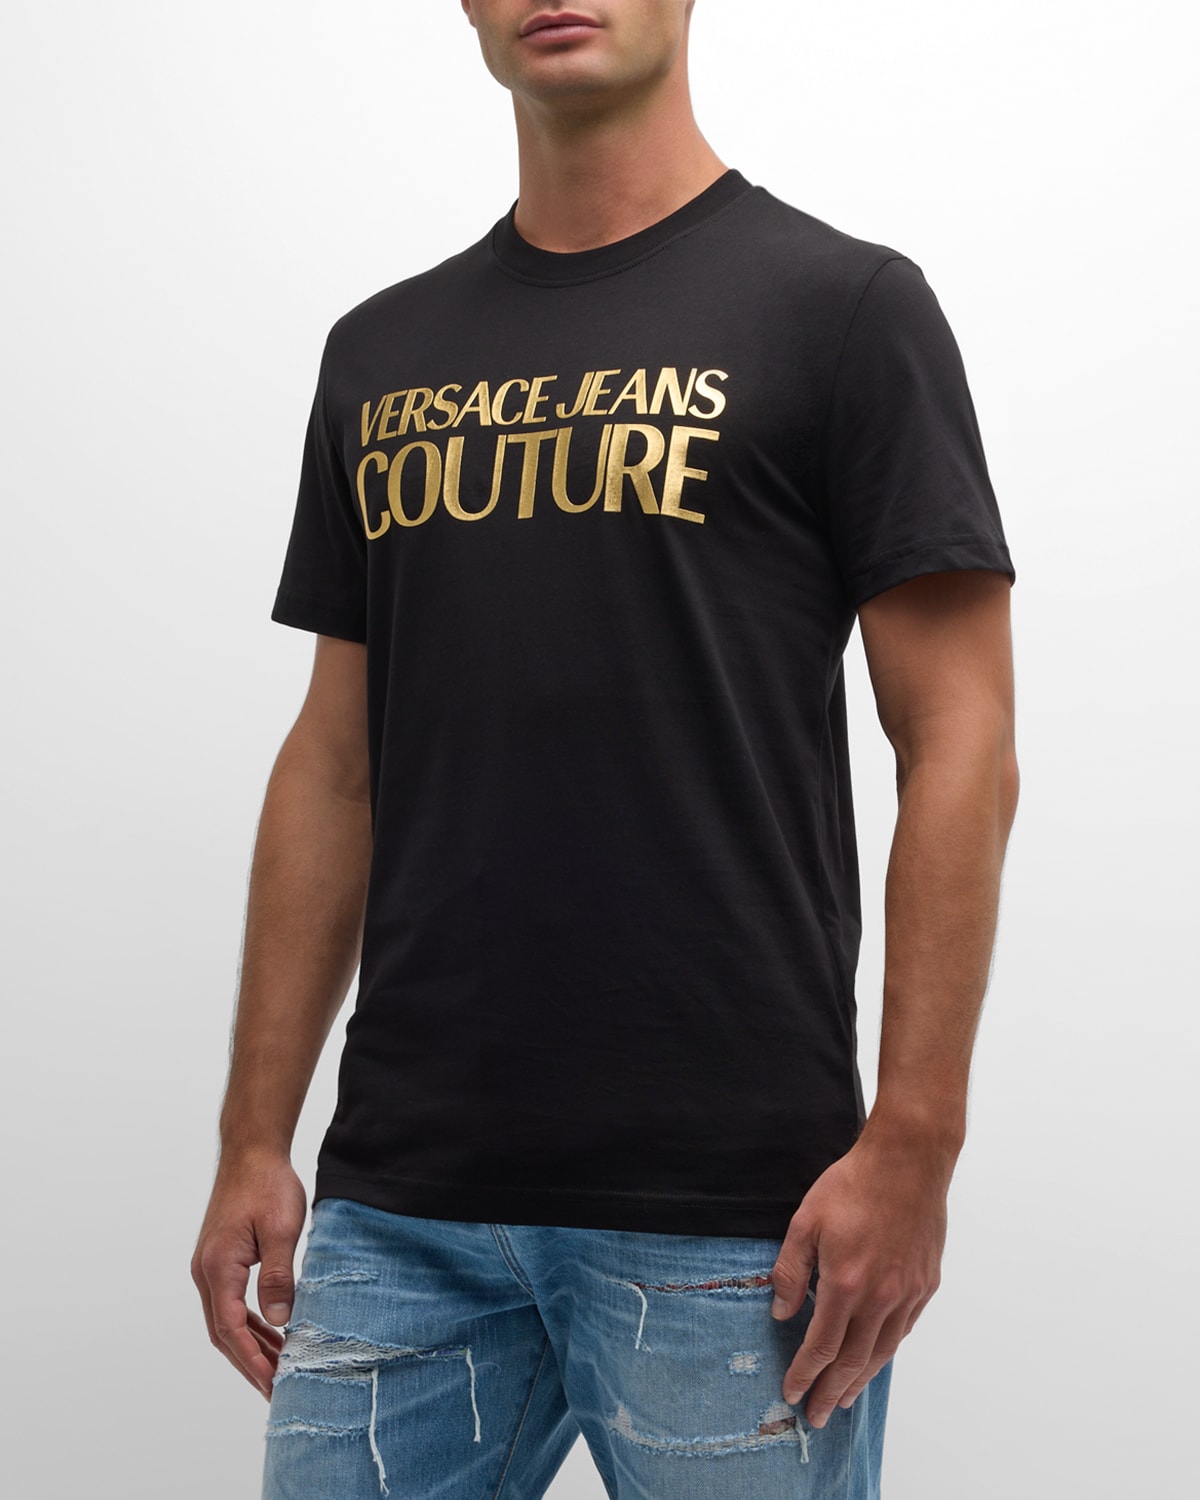 Versace Jeans Couture Men's Metallic Institutional Logo T-shirt In Black/gold